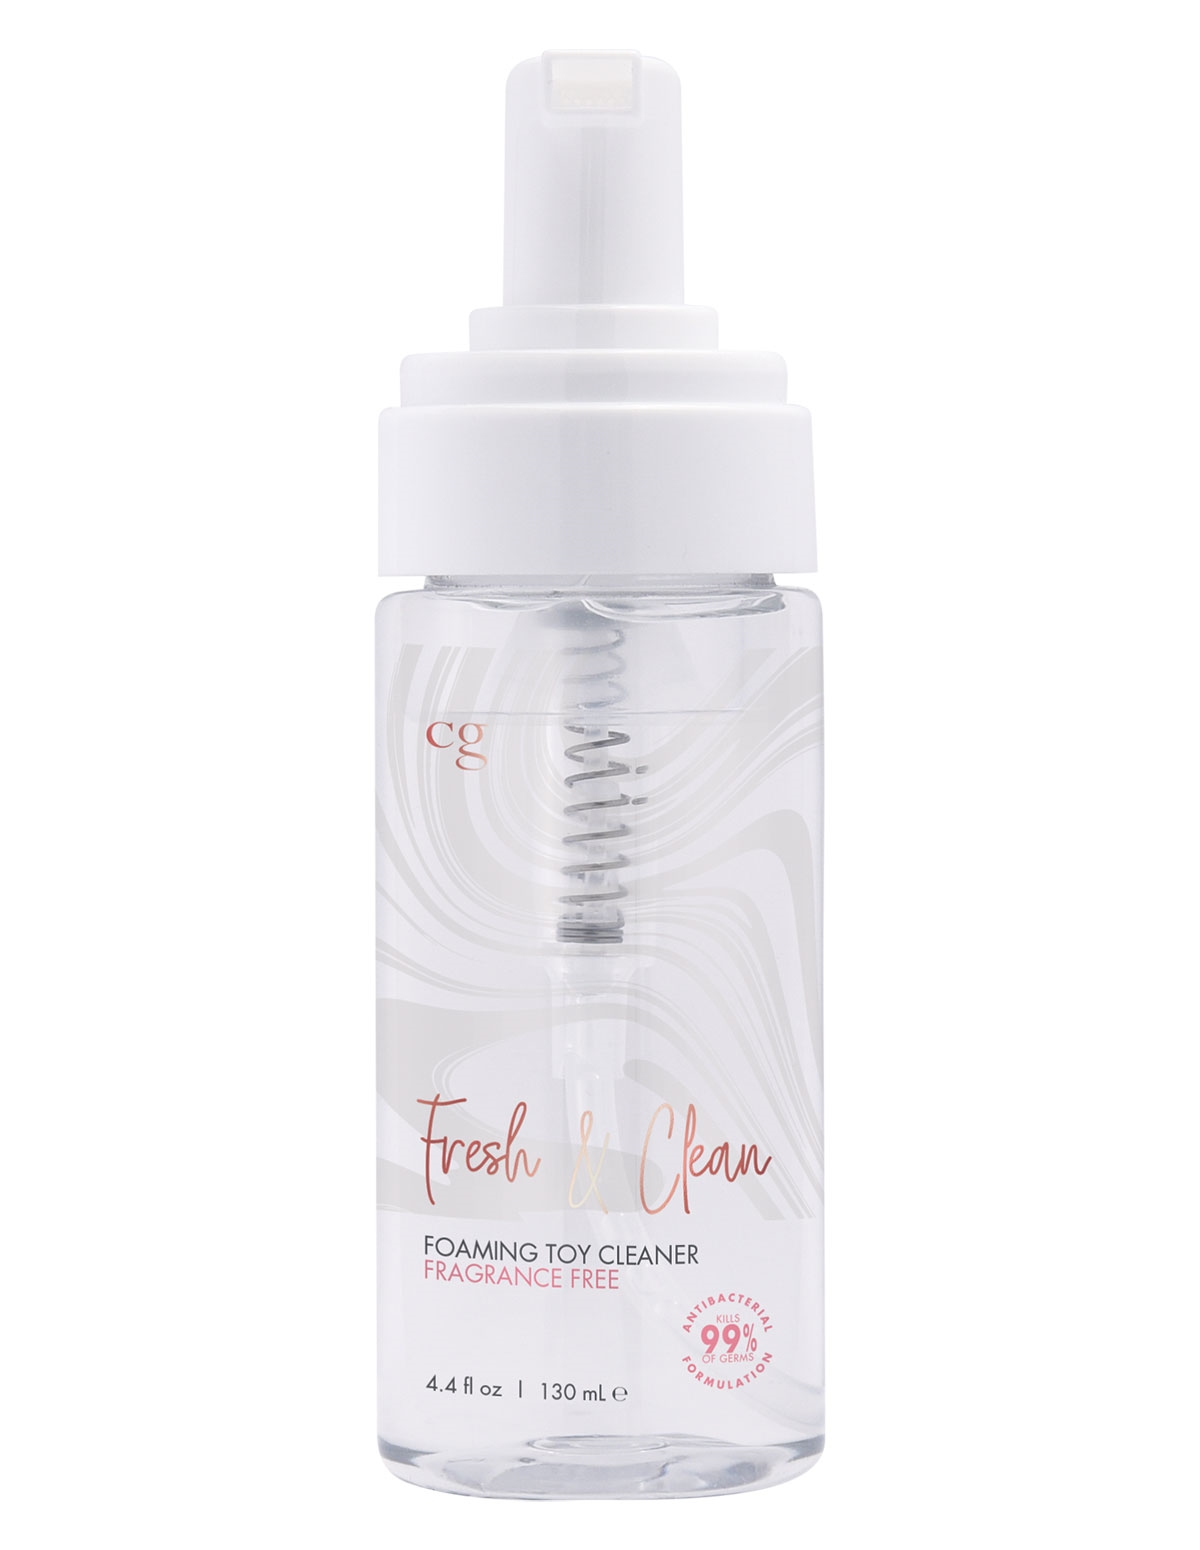 alternate image for Cgc Fresh & Clean Foaming Toy Cleaner - Fragrance Free